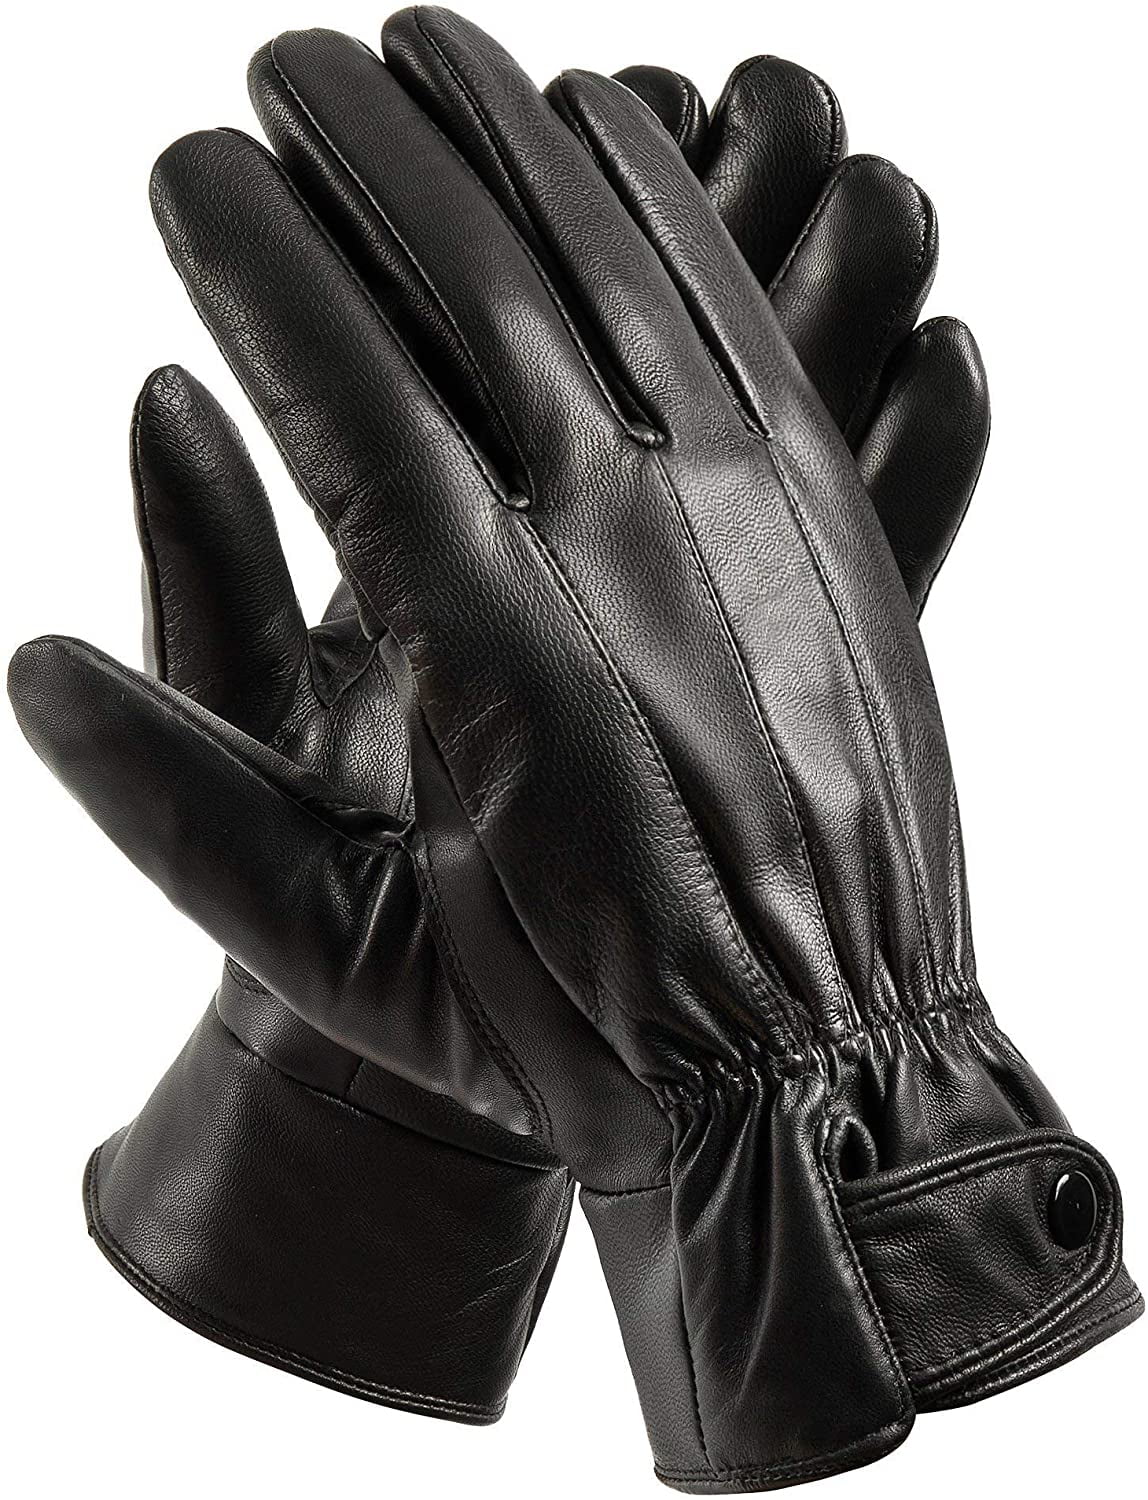 TOUCH SCREEN REAL LEATHER GLOVES THERMAL LINED BLACK DRIVING WINTER GIFT 